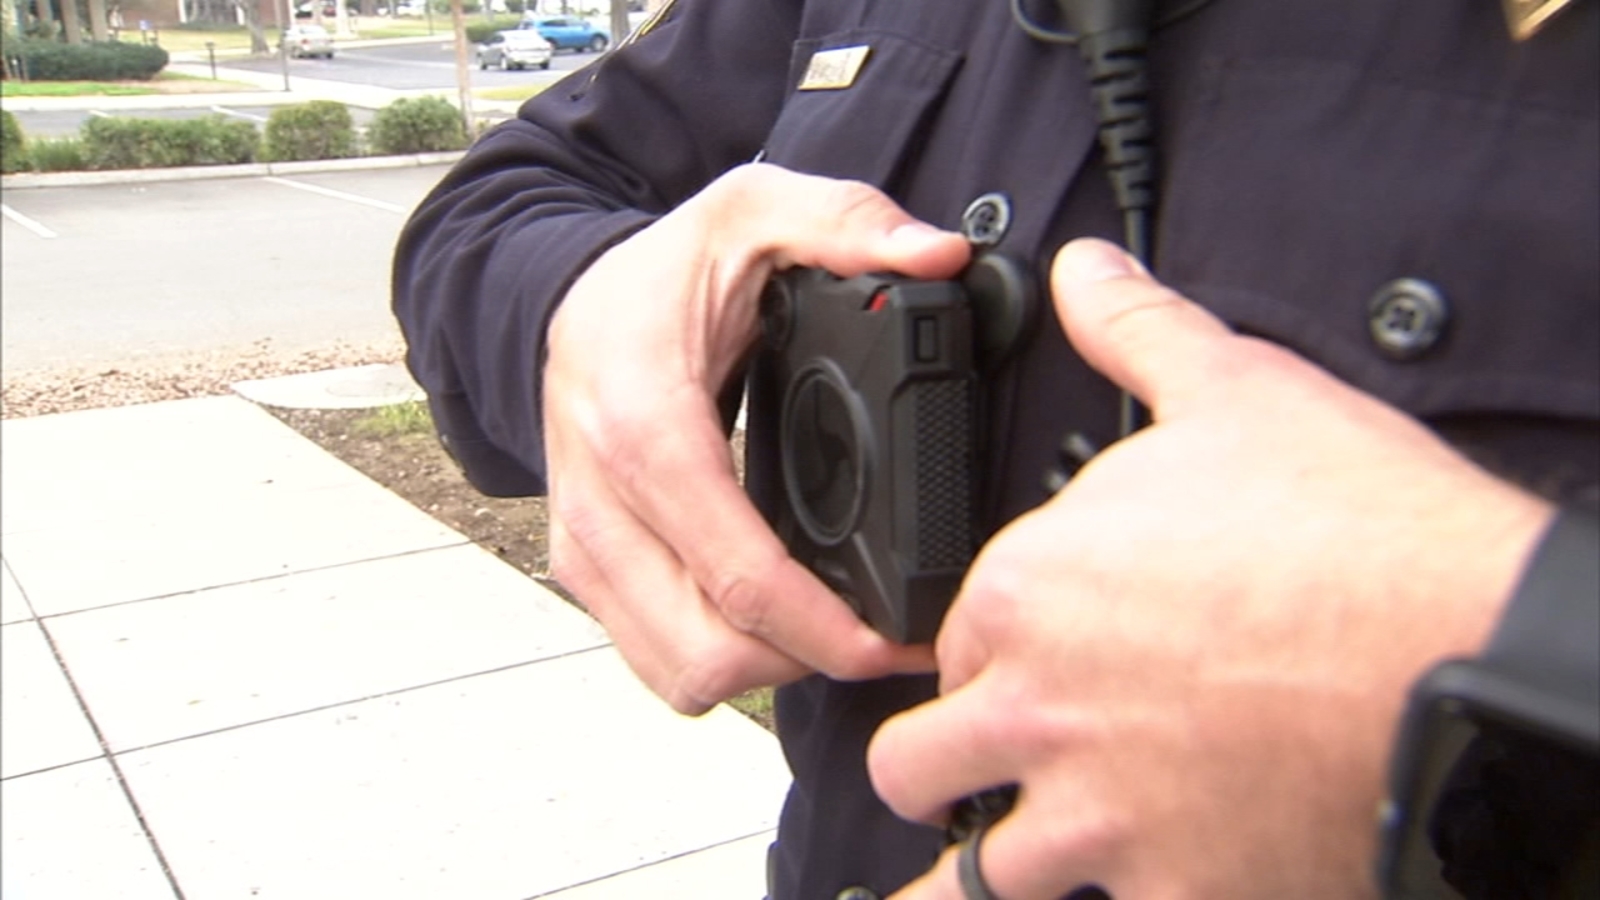 Contract approved for new body cameras for Fresno Police Department [Video]